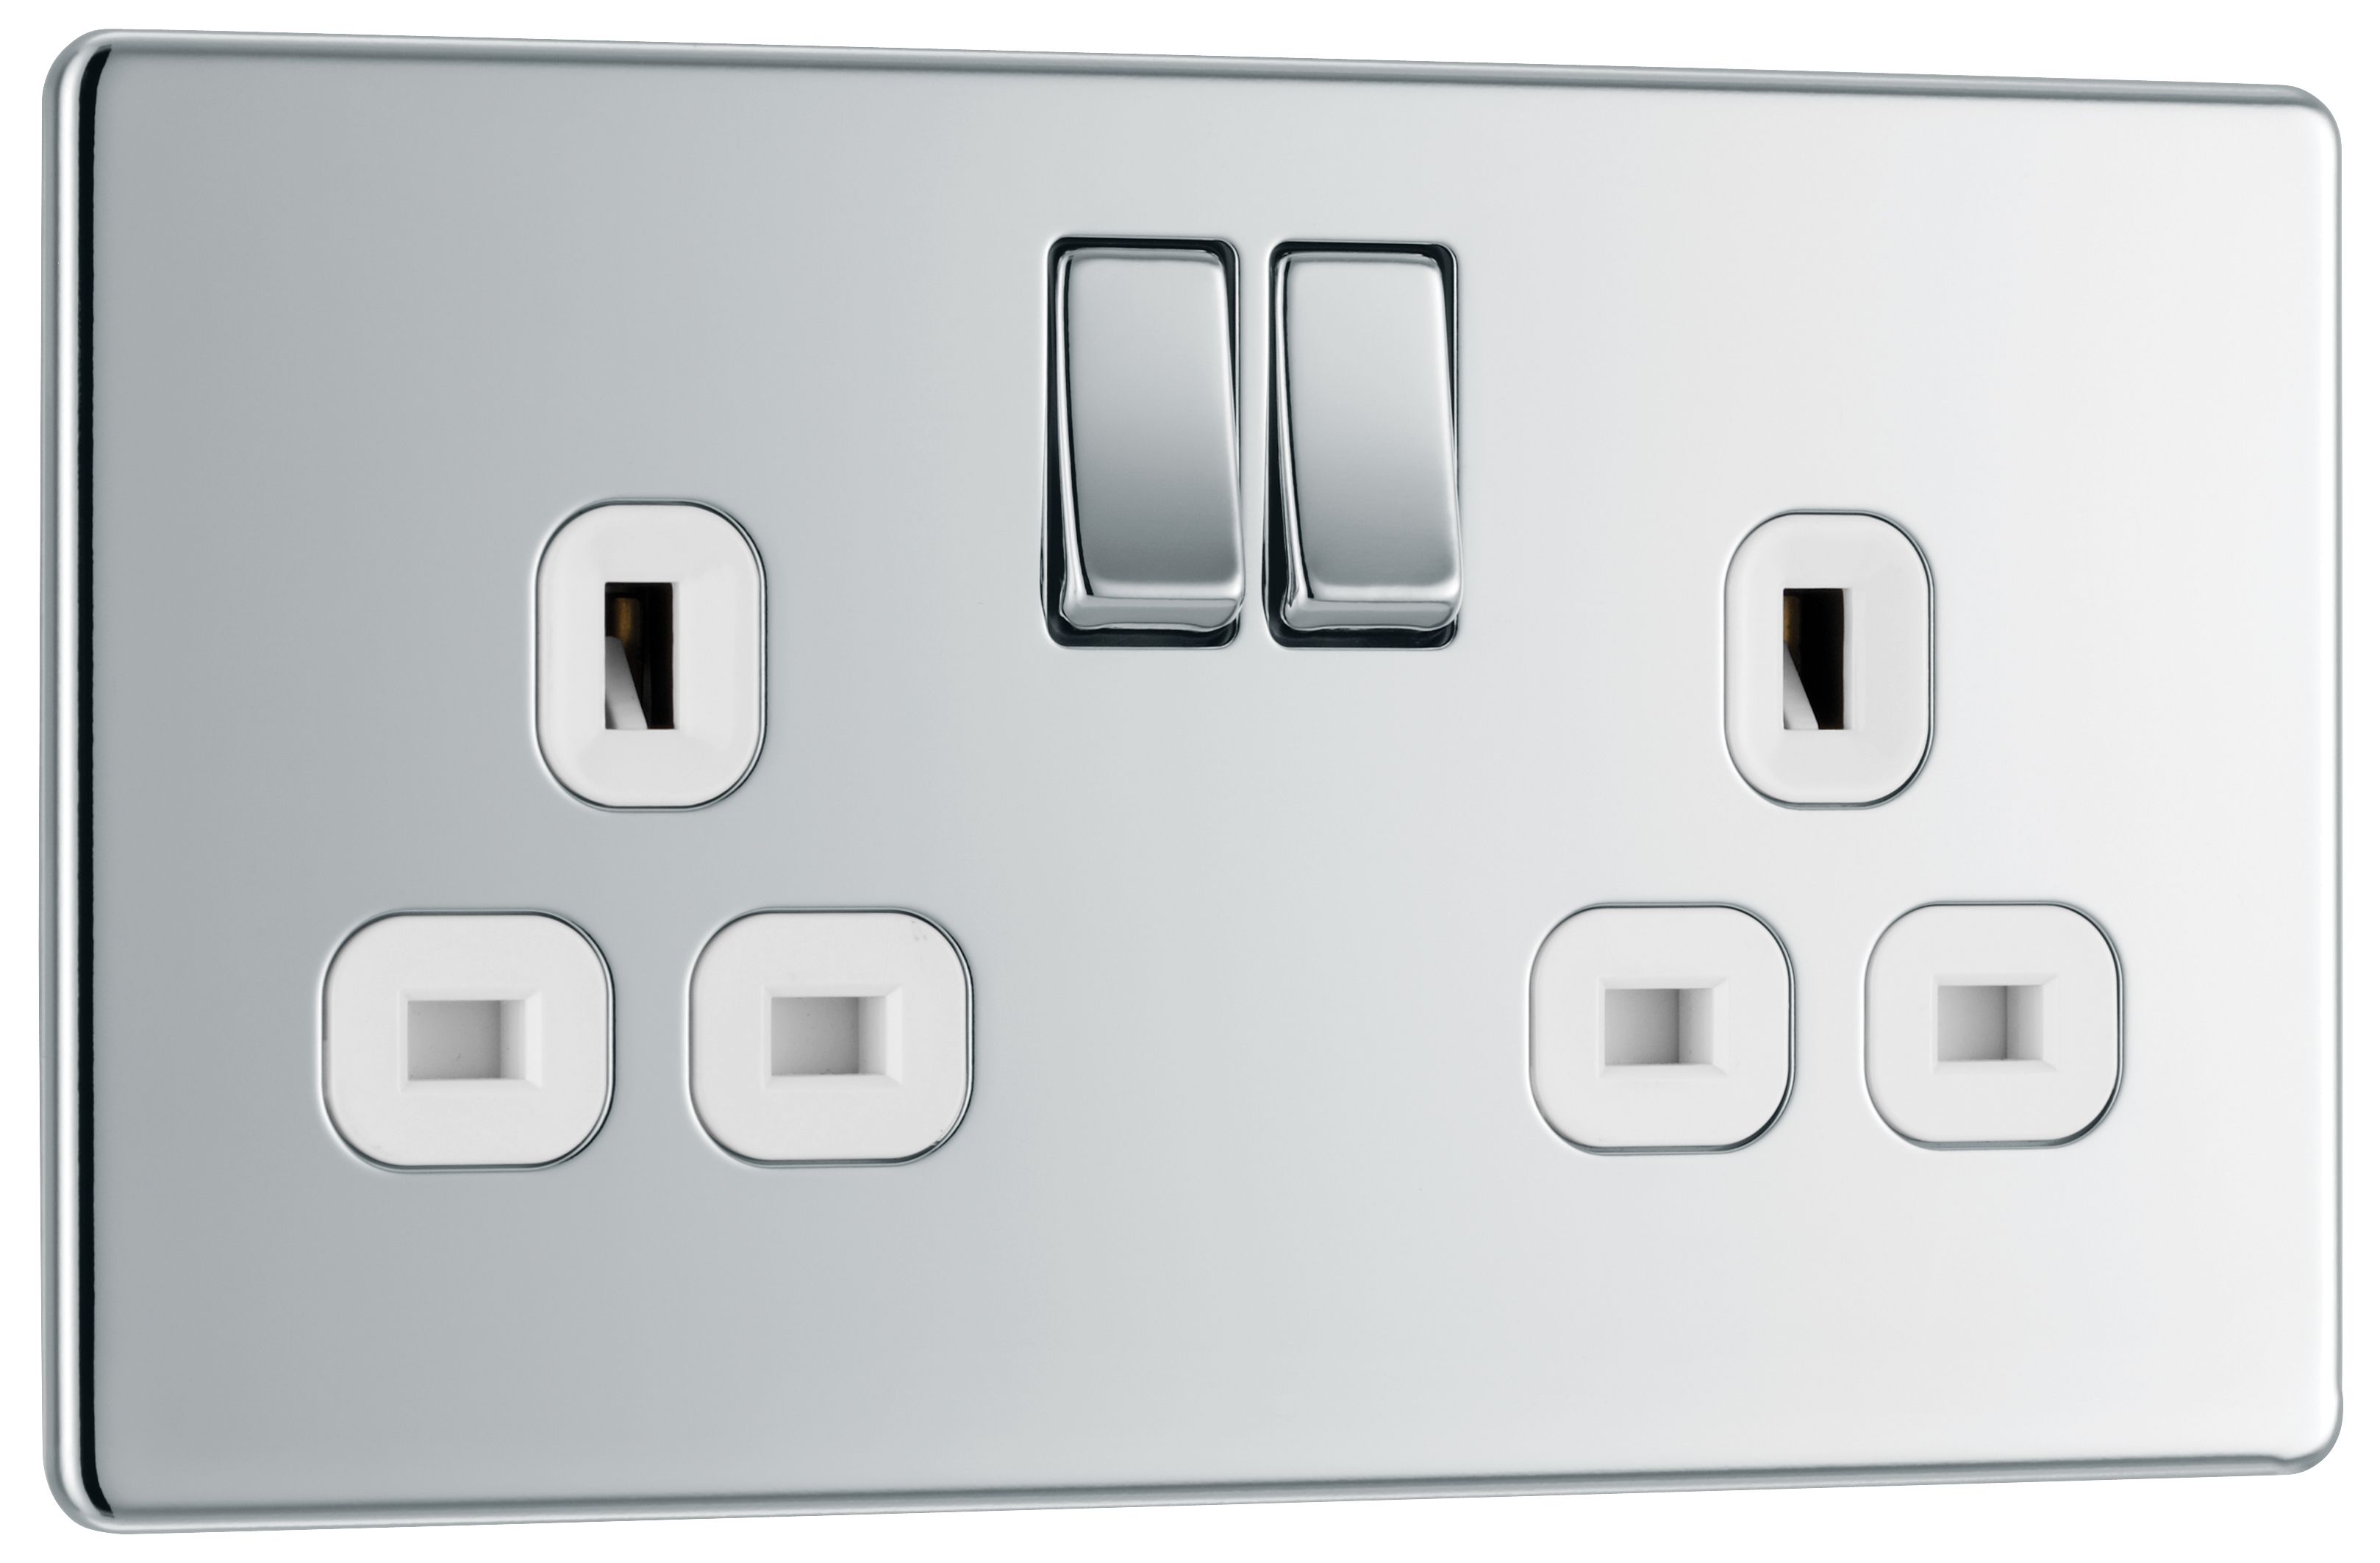 GoodHome Chrome effect Double 13A Gloss Silver Socket, Pack of 5 2 poles